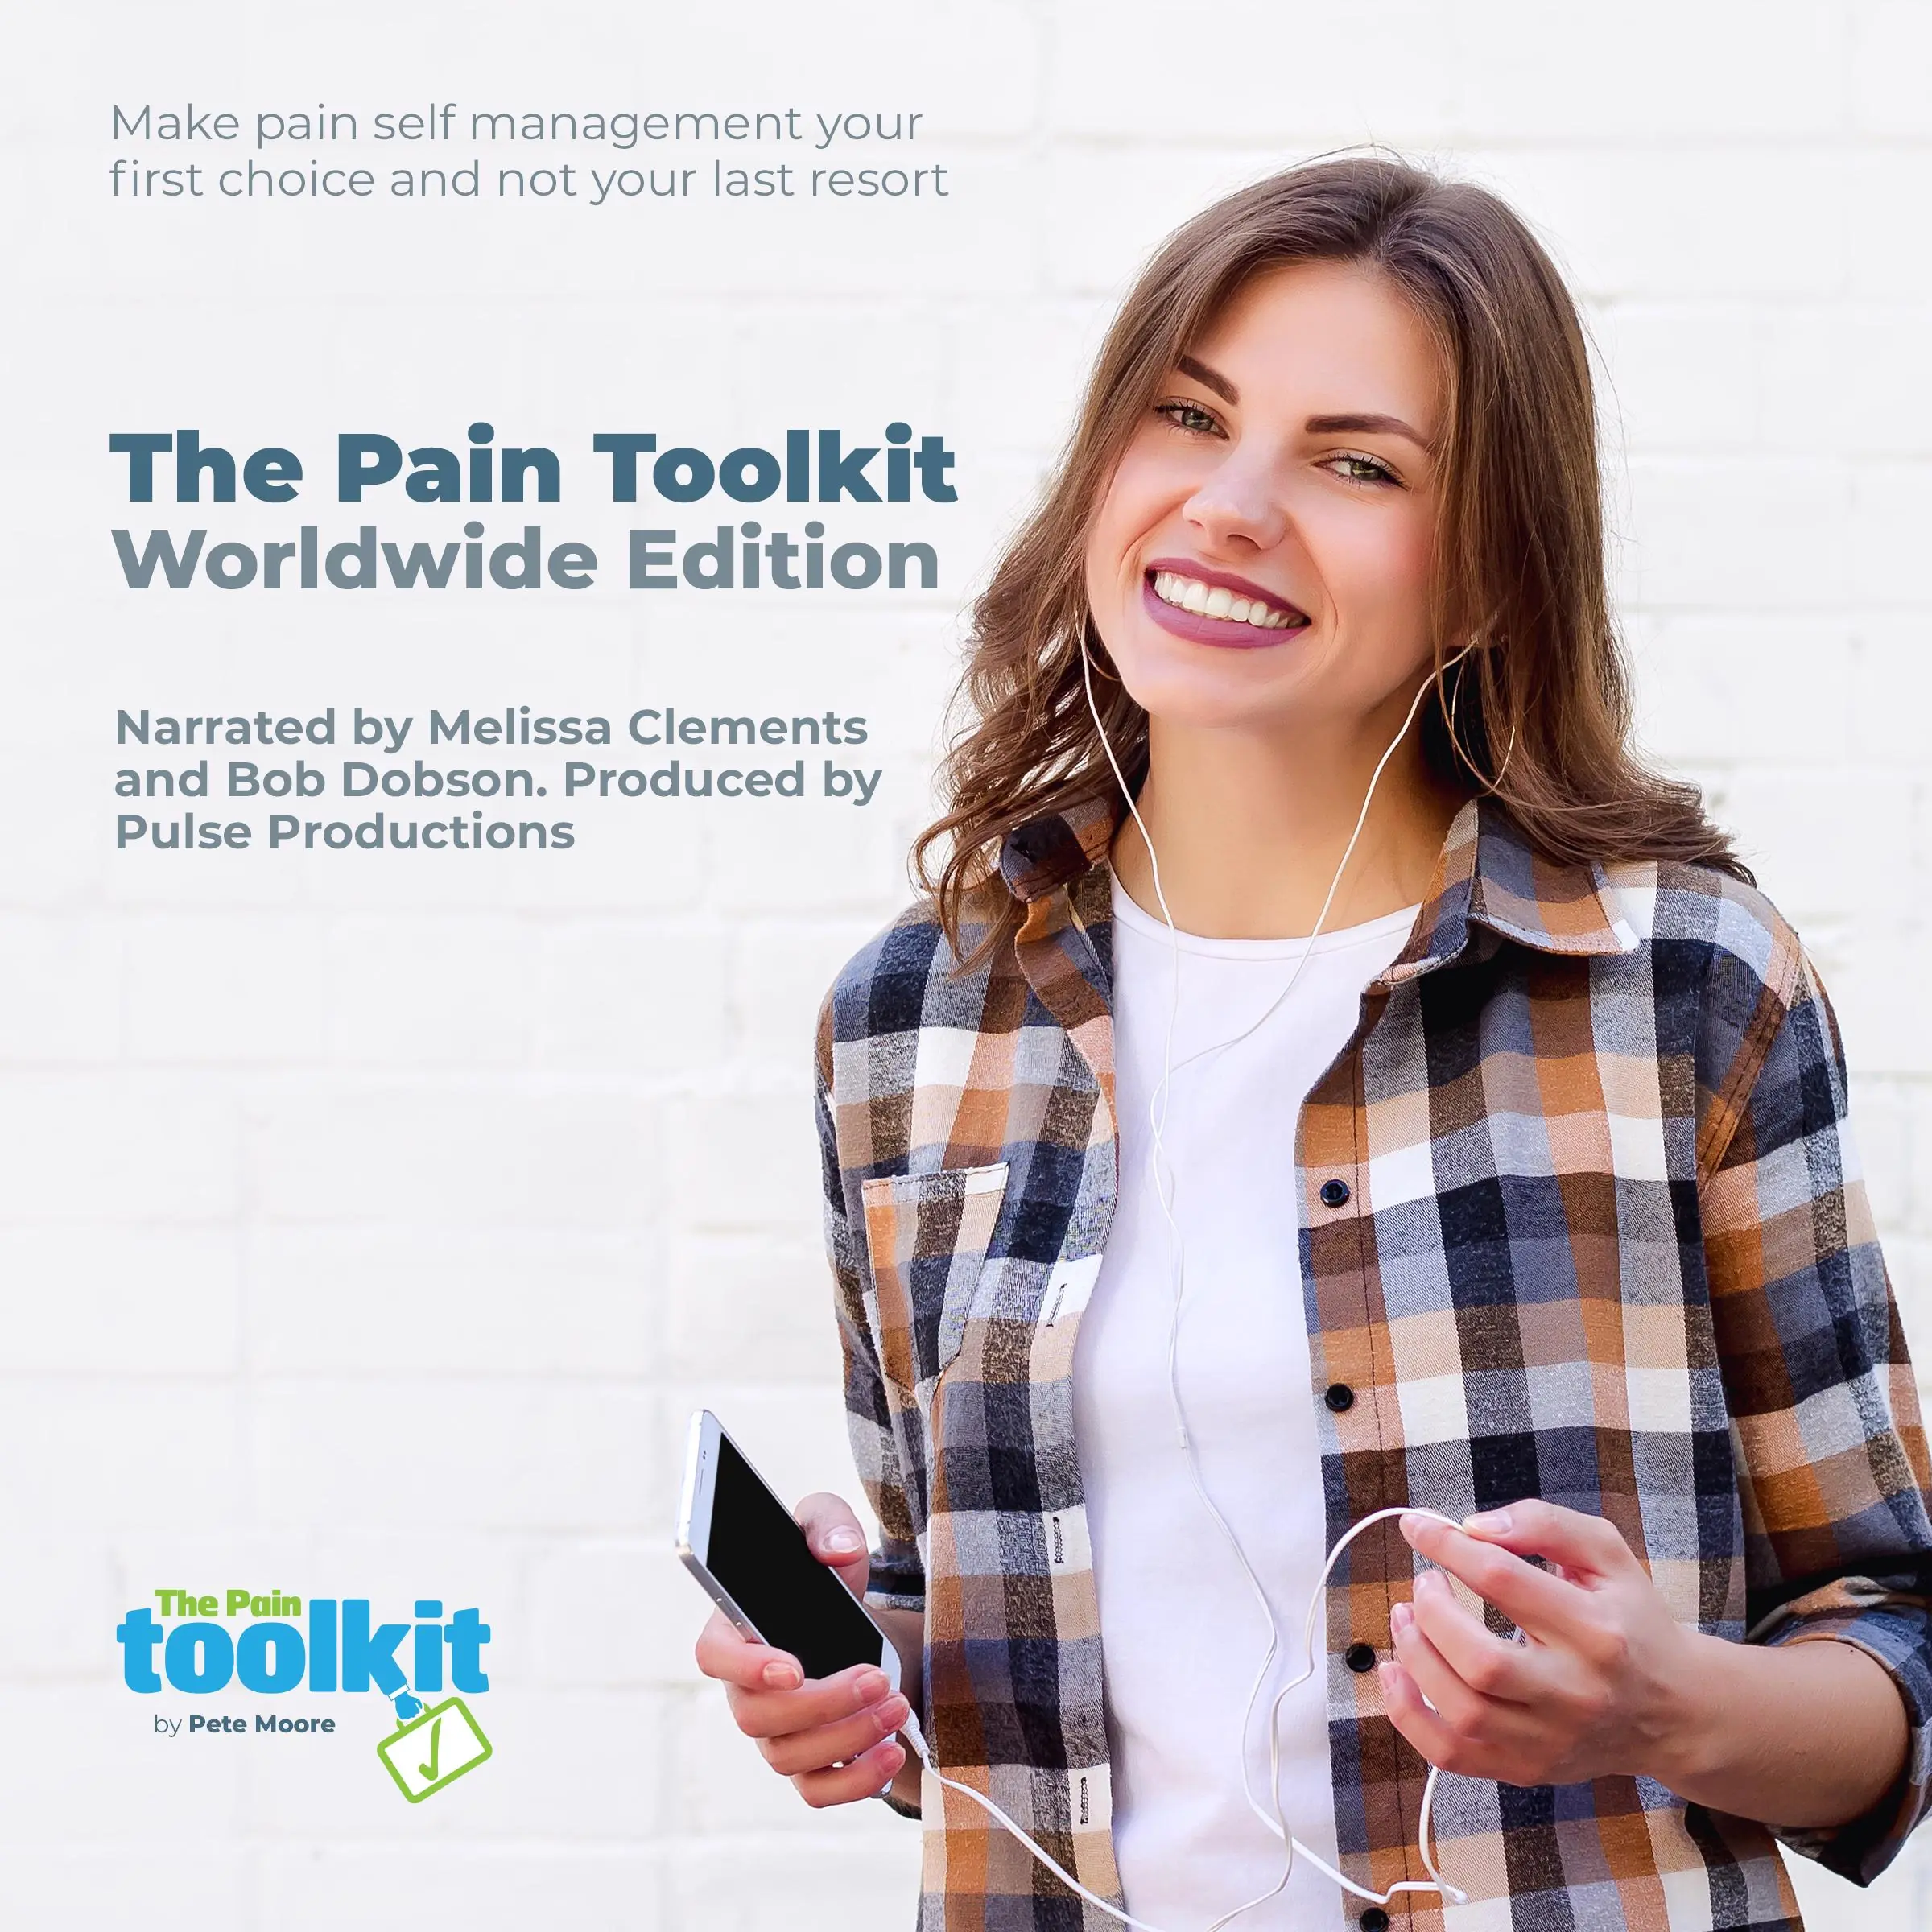 The Pain Toolkit Worldwide Edition Audiobook by Pete Moore